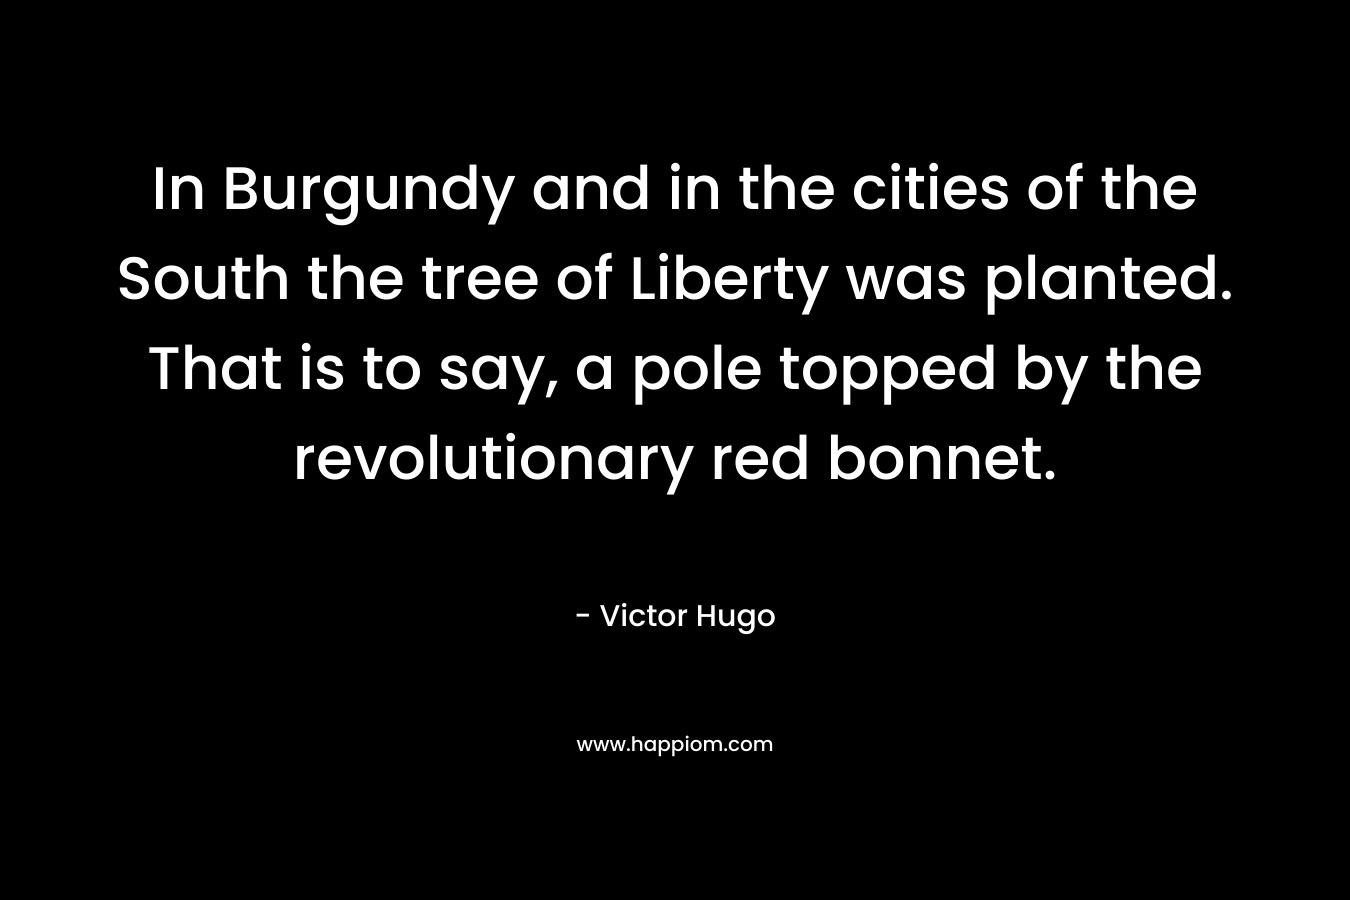 In Burgundy and in the cities of the South the tree of Liberty was planted. That is to say, a pole topped by the revolutionary red bonnet. – Victor Hugo